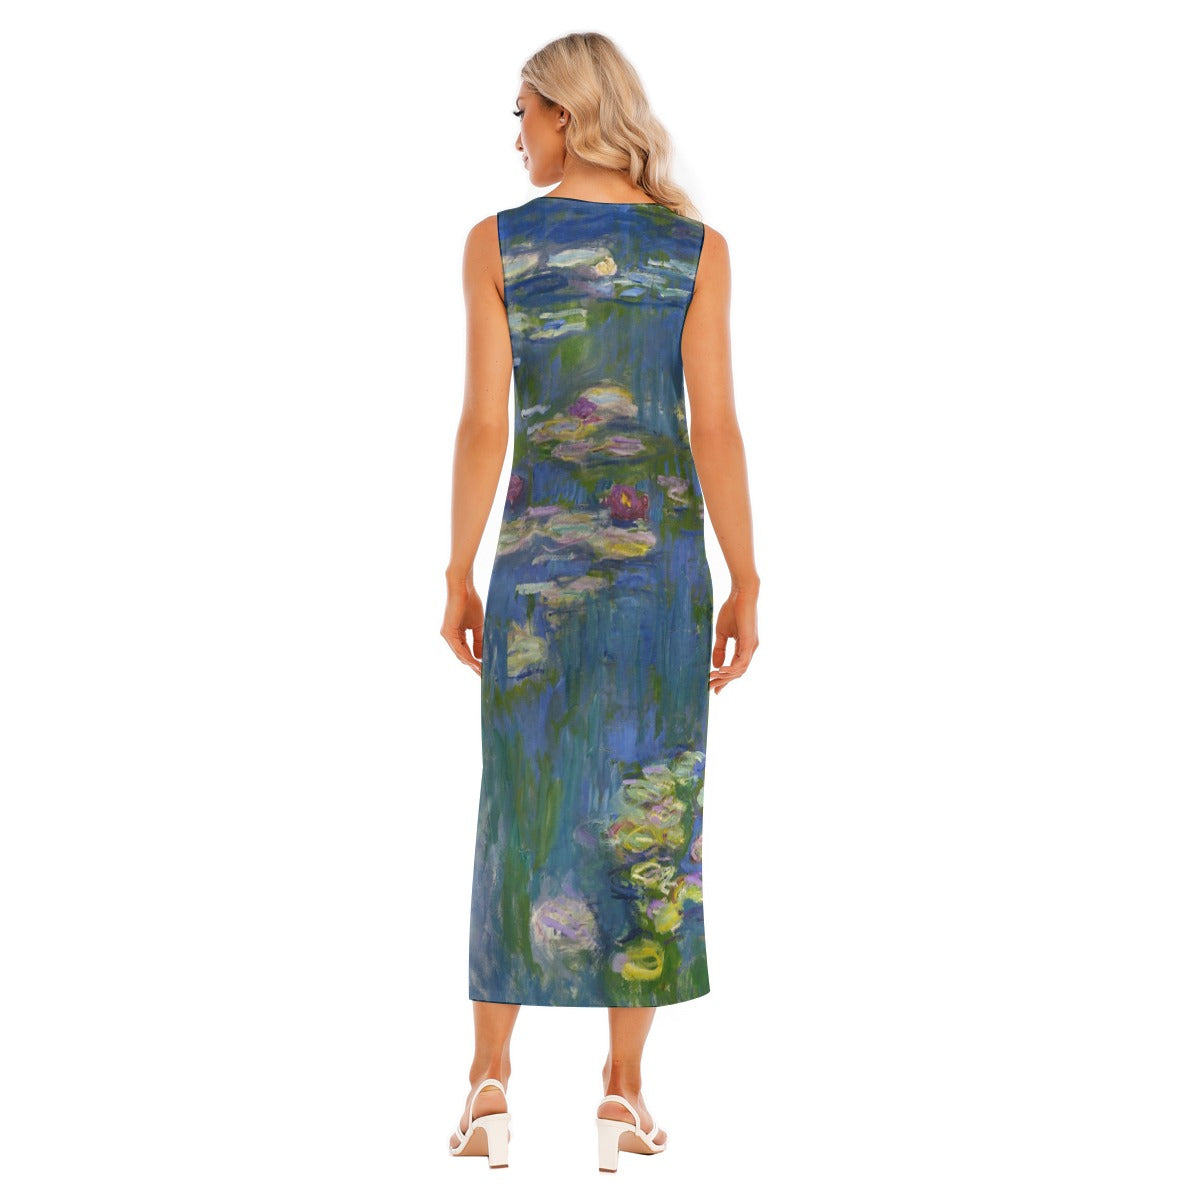 Artistic Floral Tank Dress Inspired by Monet